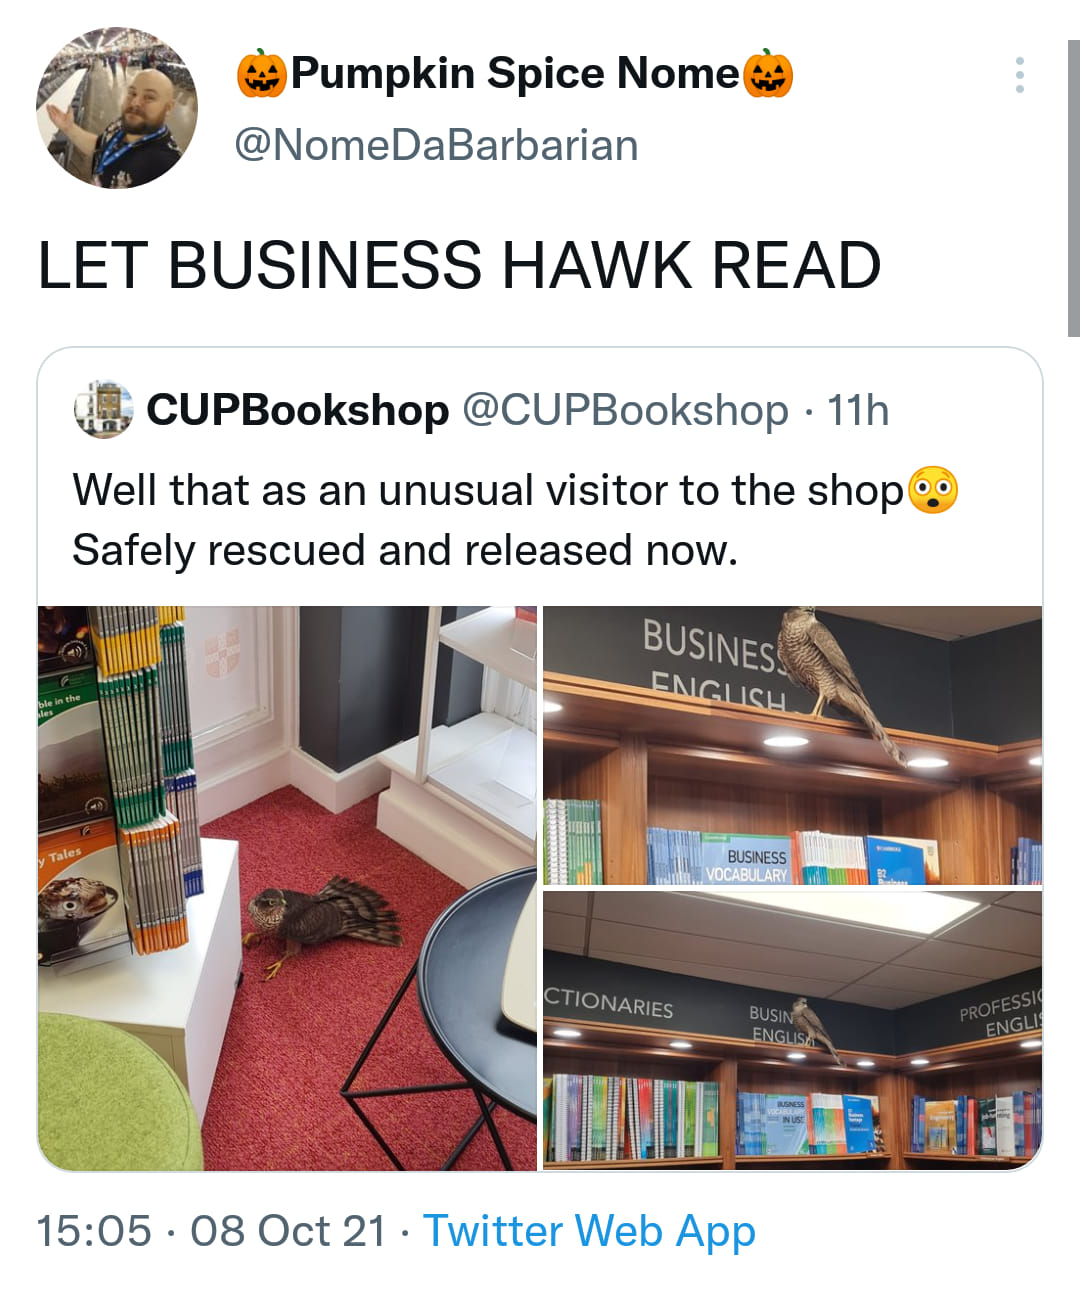 table - Pumpkin Spice Nome Let Business Hawk Read CUPBookshop 11h Well that as an unusual visitor to the shop Safely rescued and released now. Business English ble in the y Tales Business Ary Ctionaries Busin Englisa Professio Engli Reness 08 Oct 21 Twitt